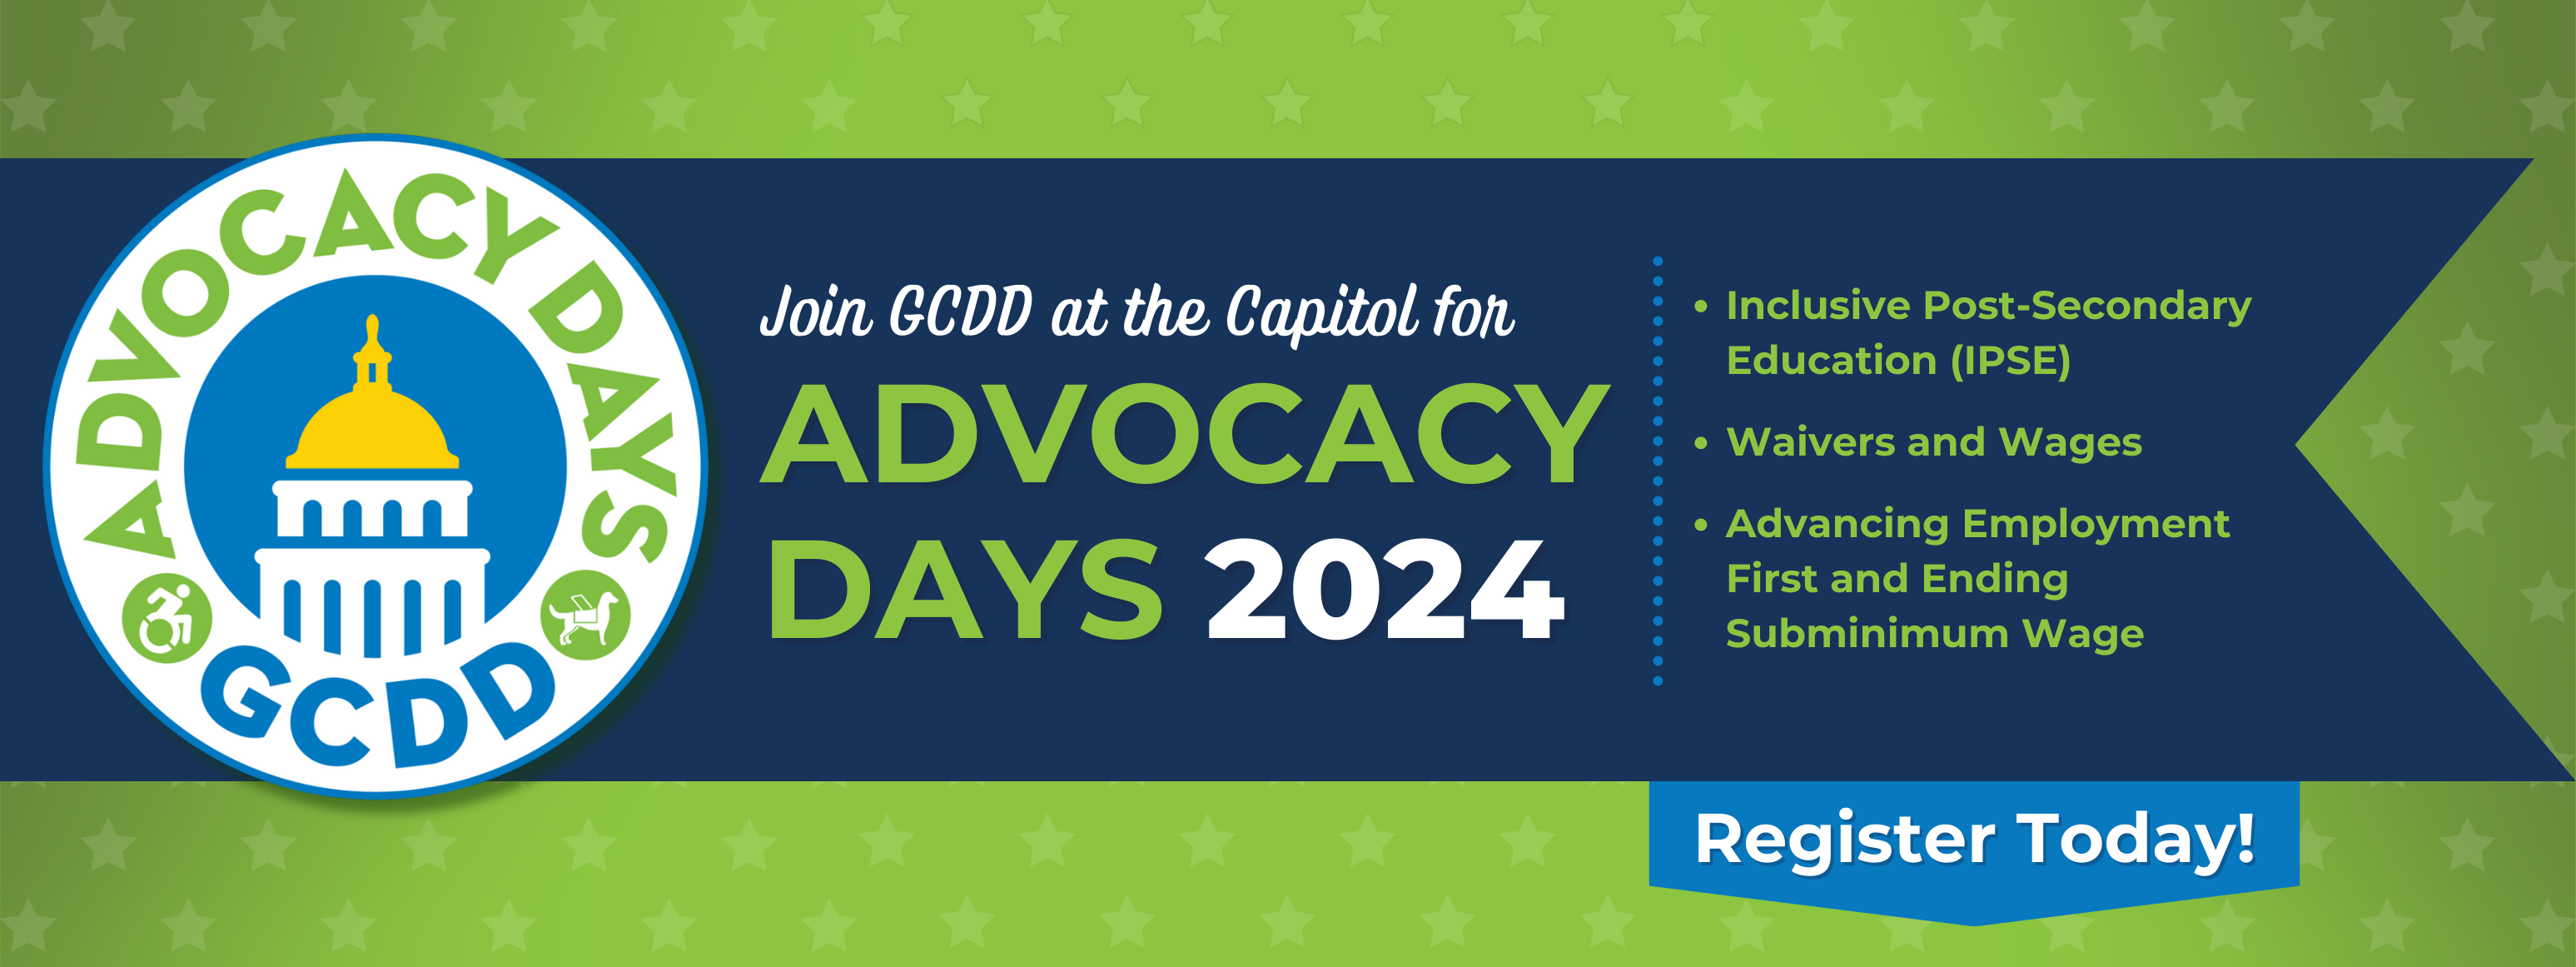 A green and blue banner with the state capitol badge and the words "Join GCDD at the Capitol for Advocacy Days 2024" and the topics to be explored.